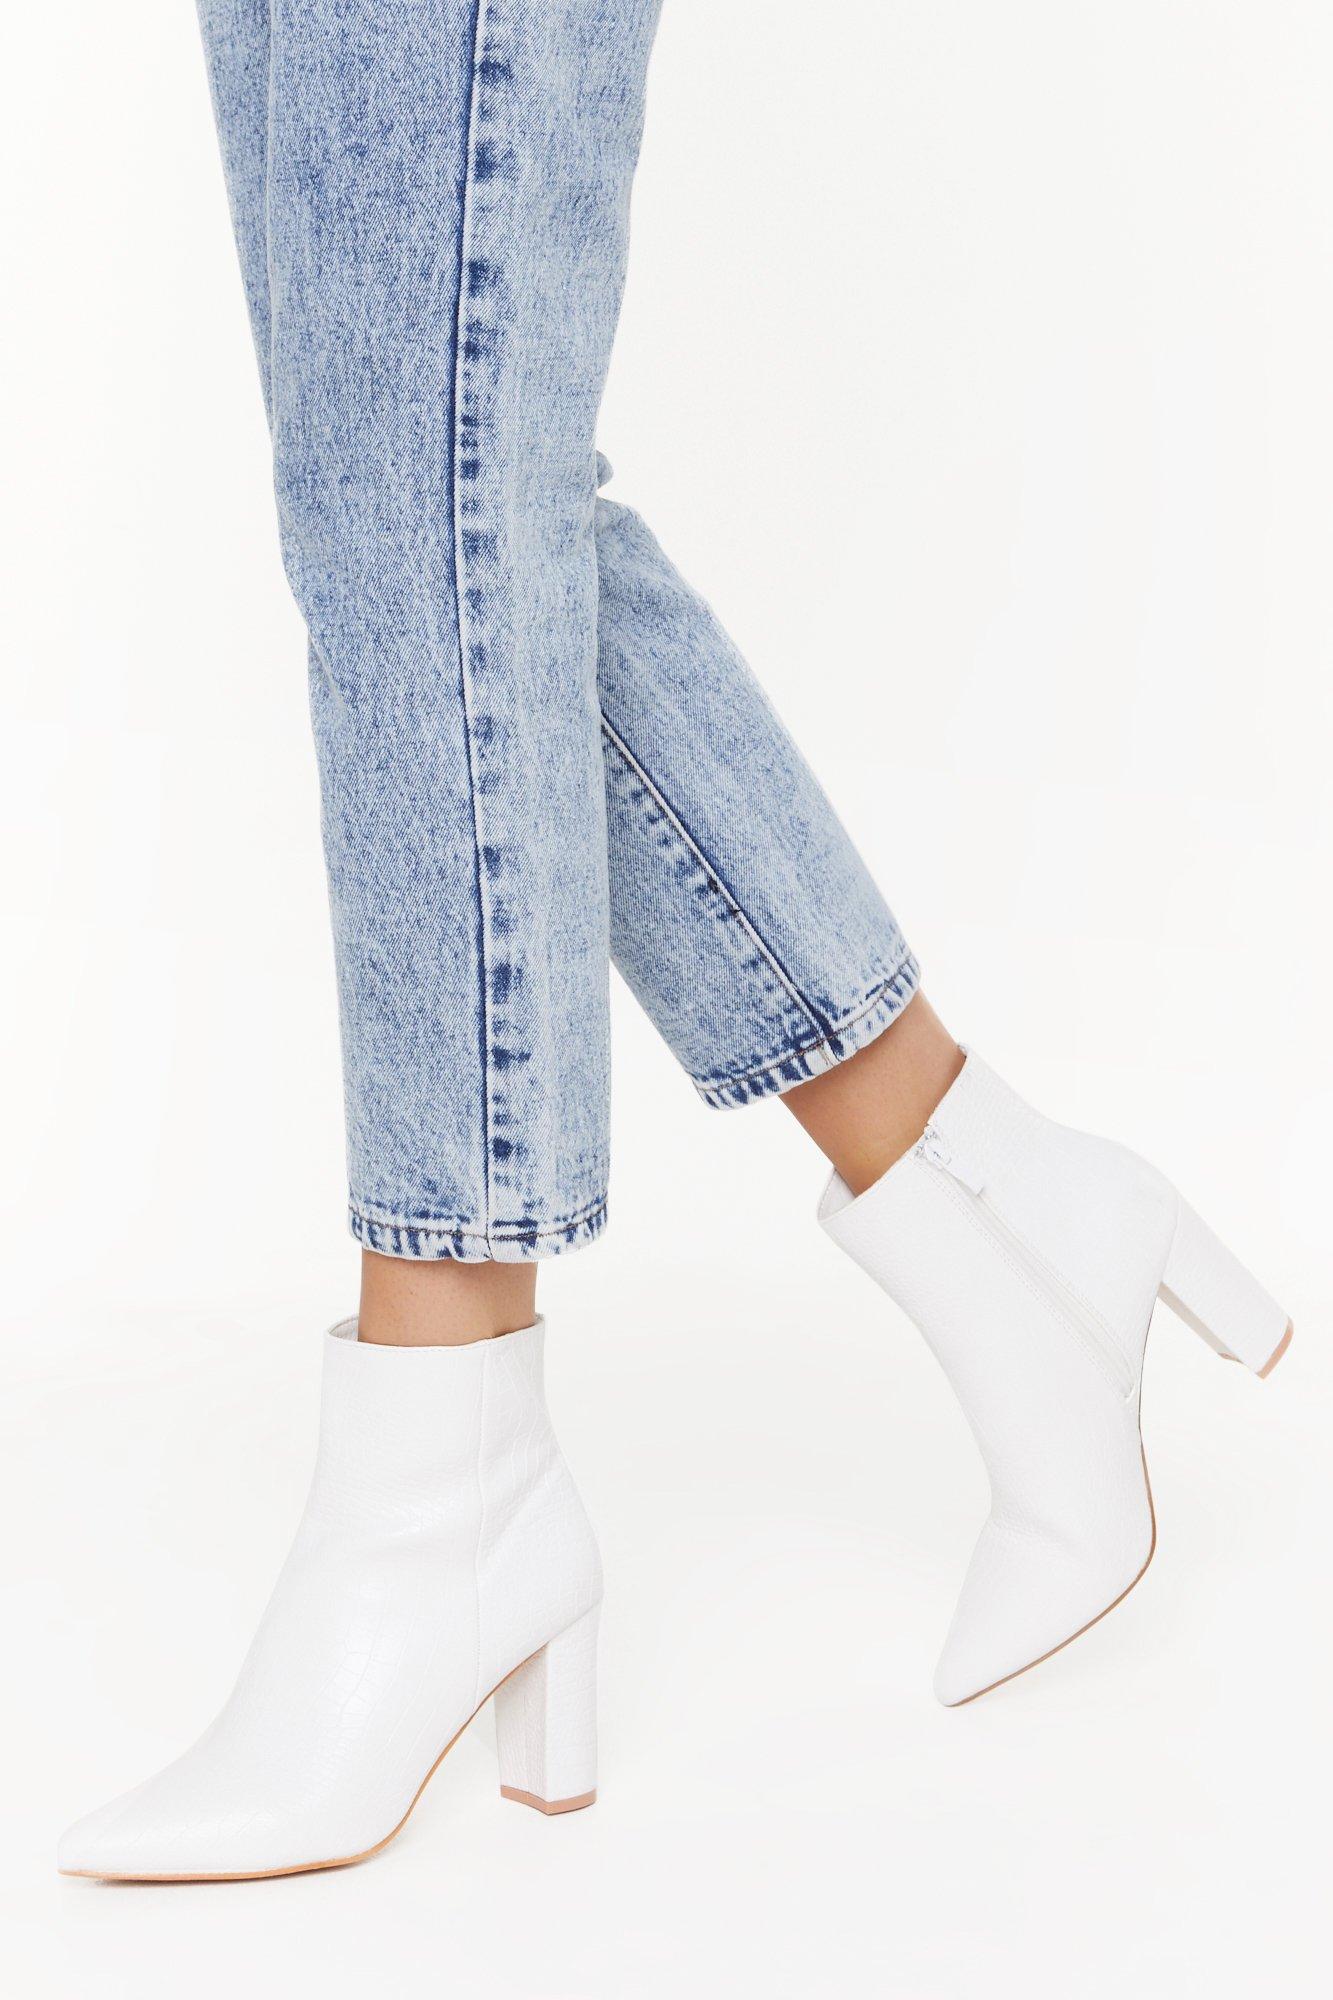 white croc ankle boots